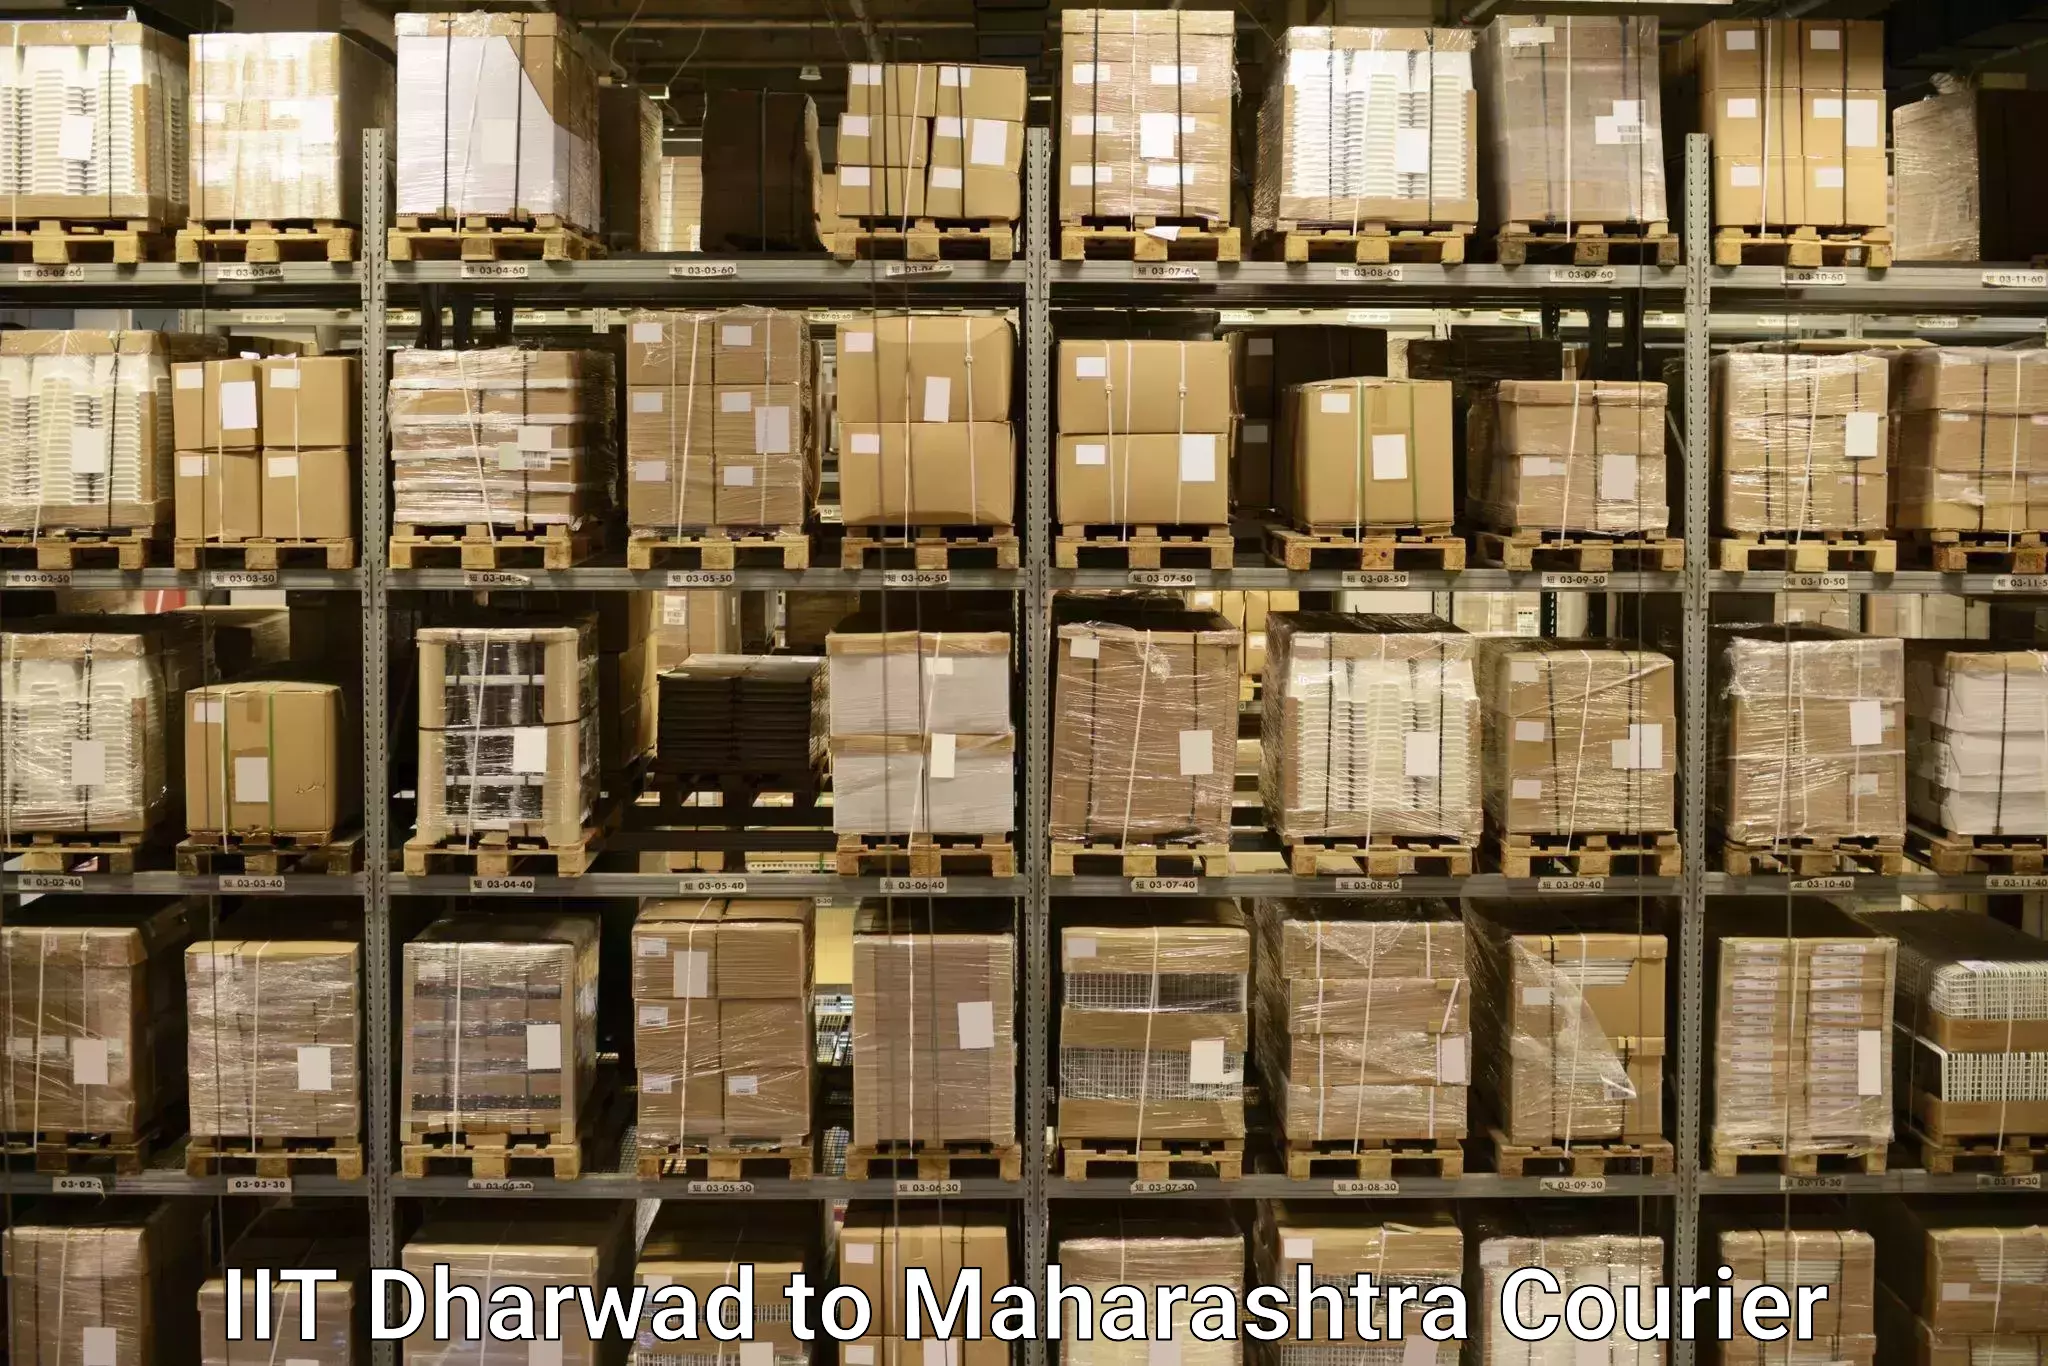 Baggage transport professionals IIT Dharwad to Oras